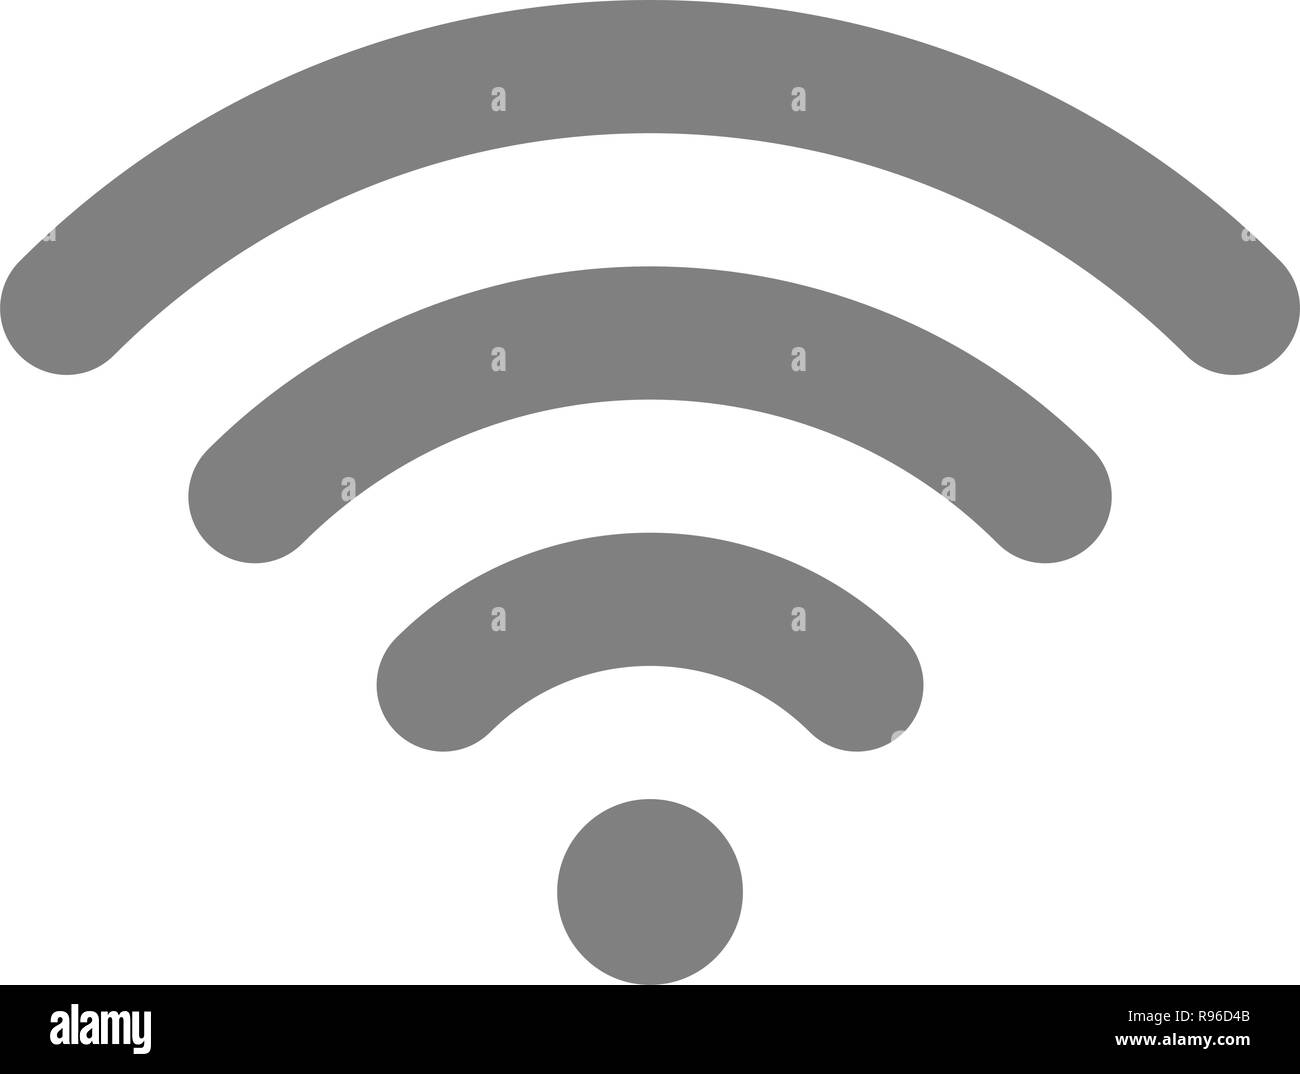 Wifi symbol icon - medium gray simple rounded, isolated - vector illustration Stock Vector